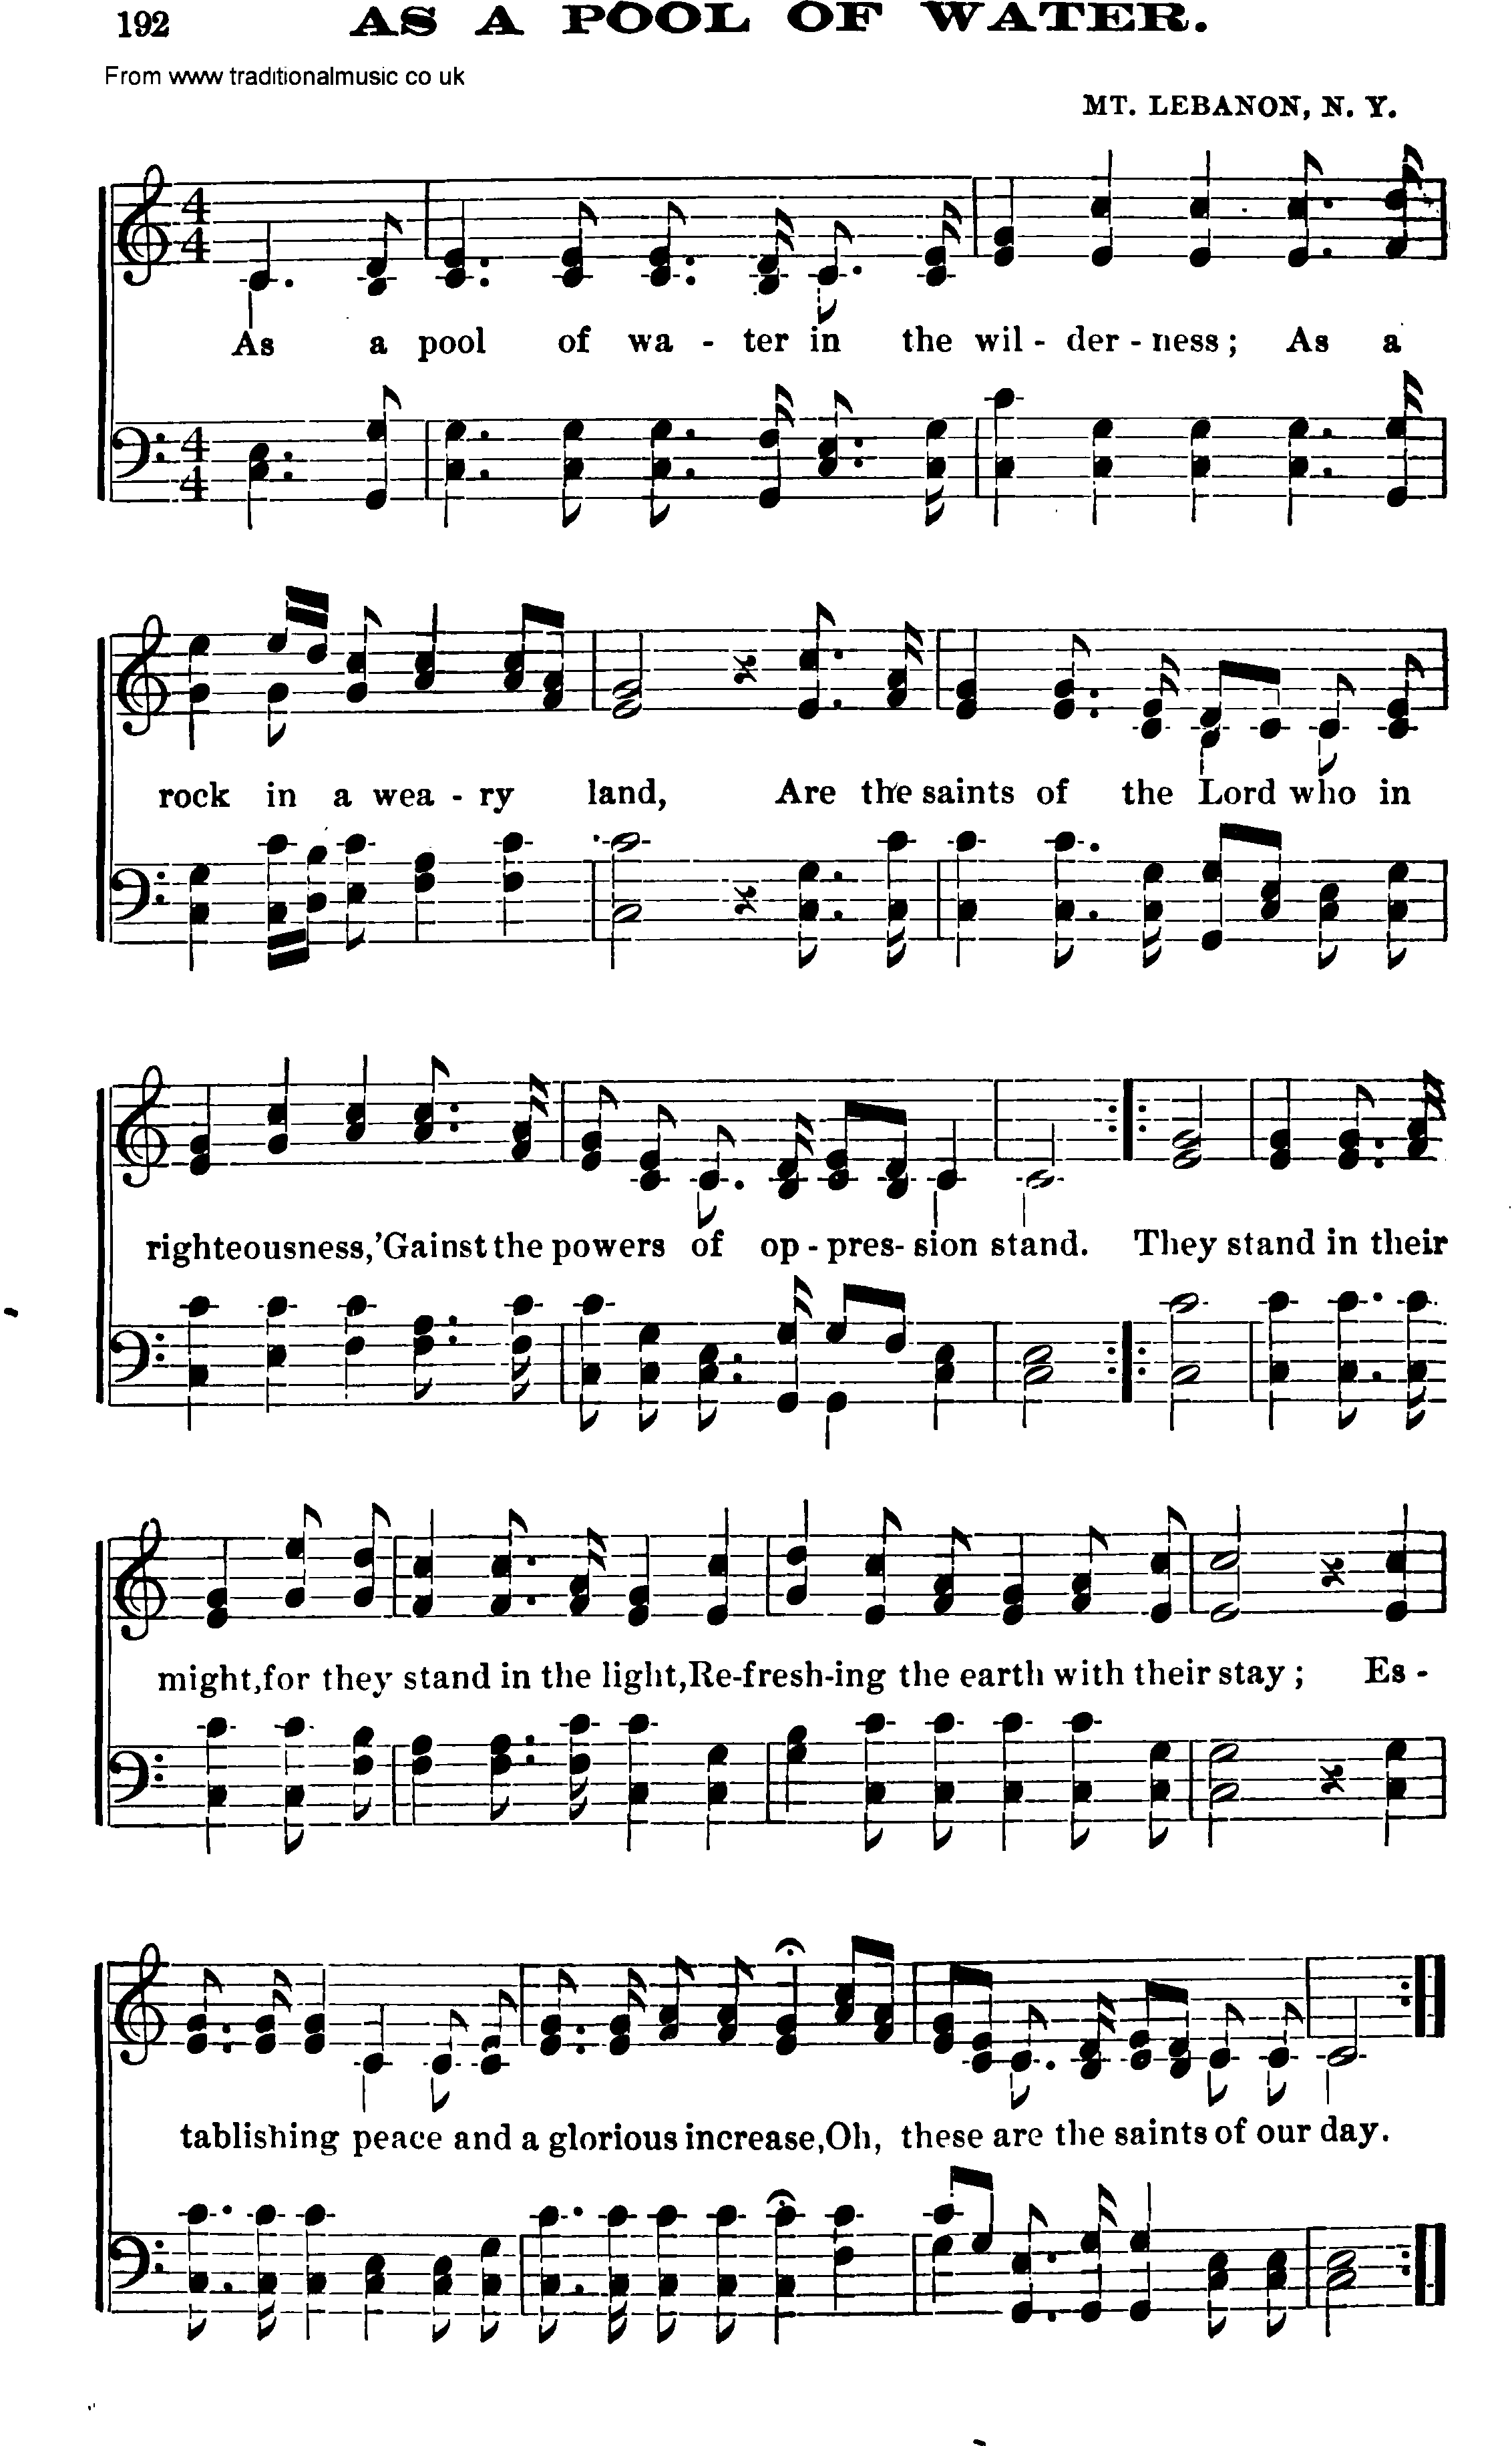 Shaker Music collection, Hymn: As A Pool Of Water, sheetmusic and PDF